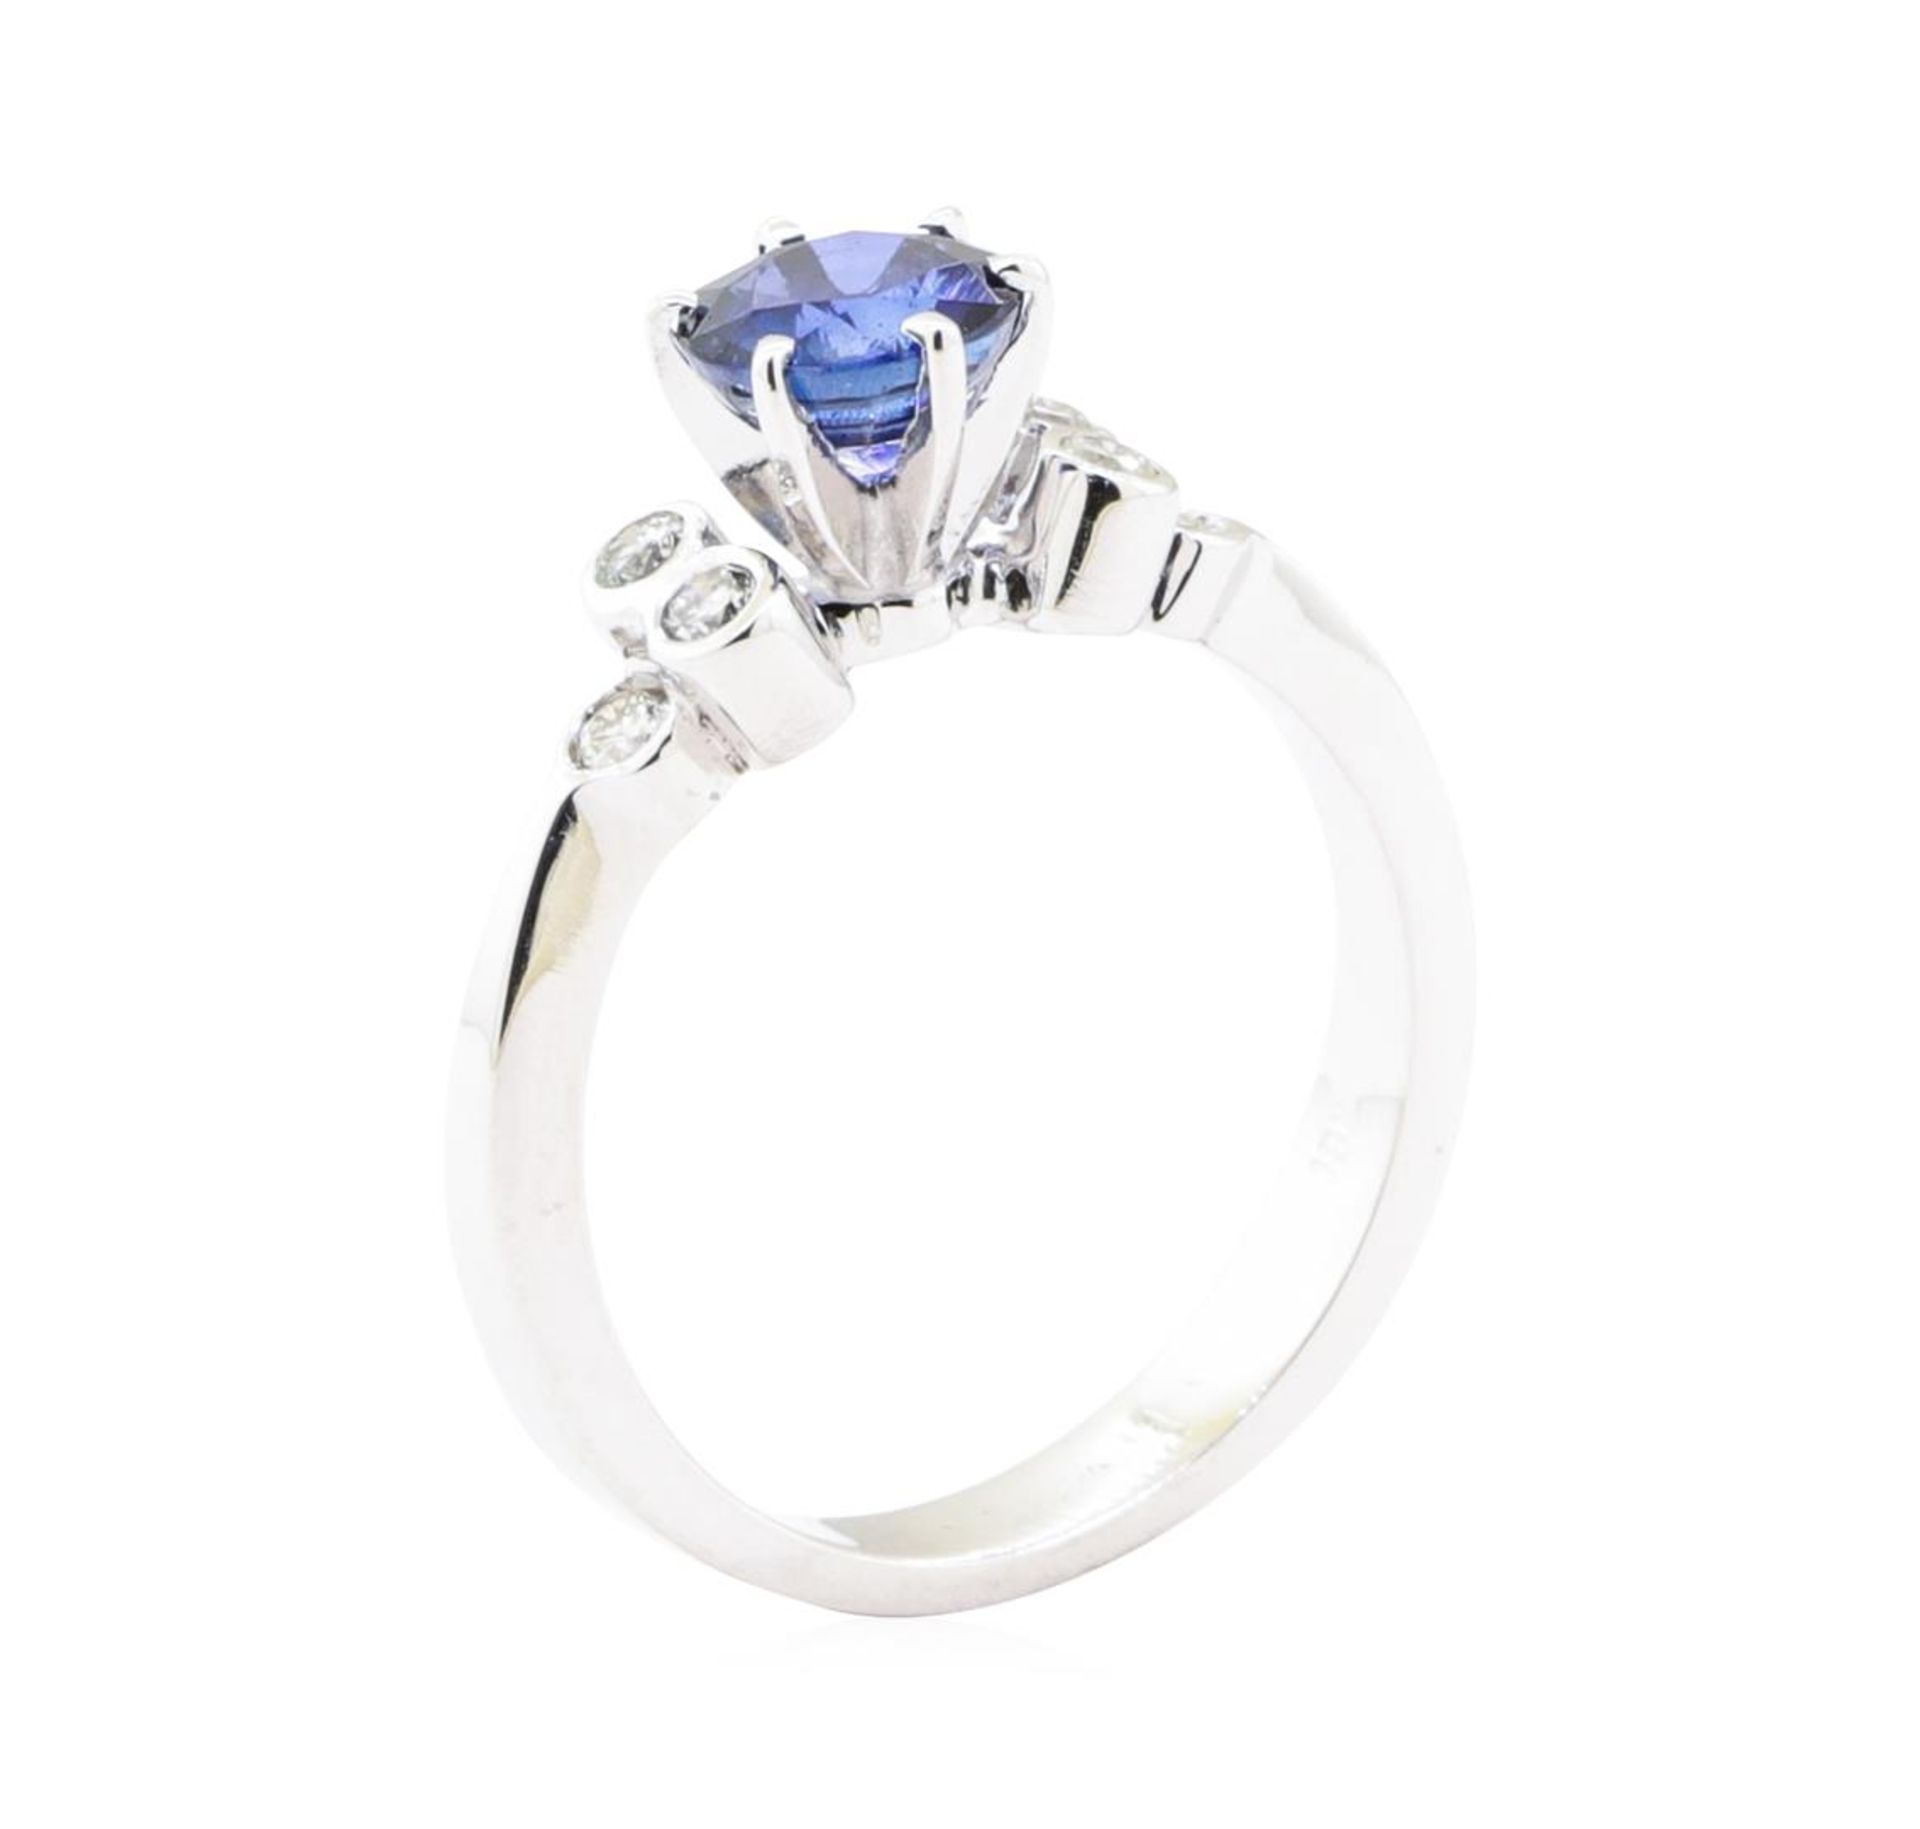 1.44ctw Sapphire and Diamond Ring - 18KT White Gold - Image 4 of 4